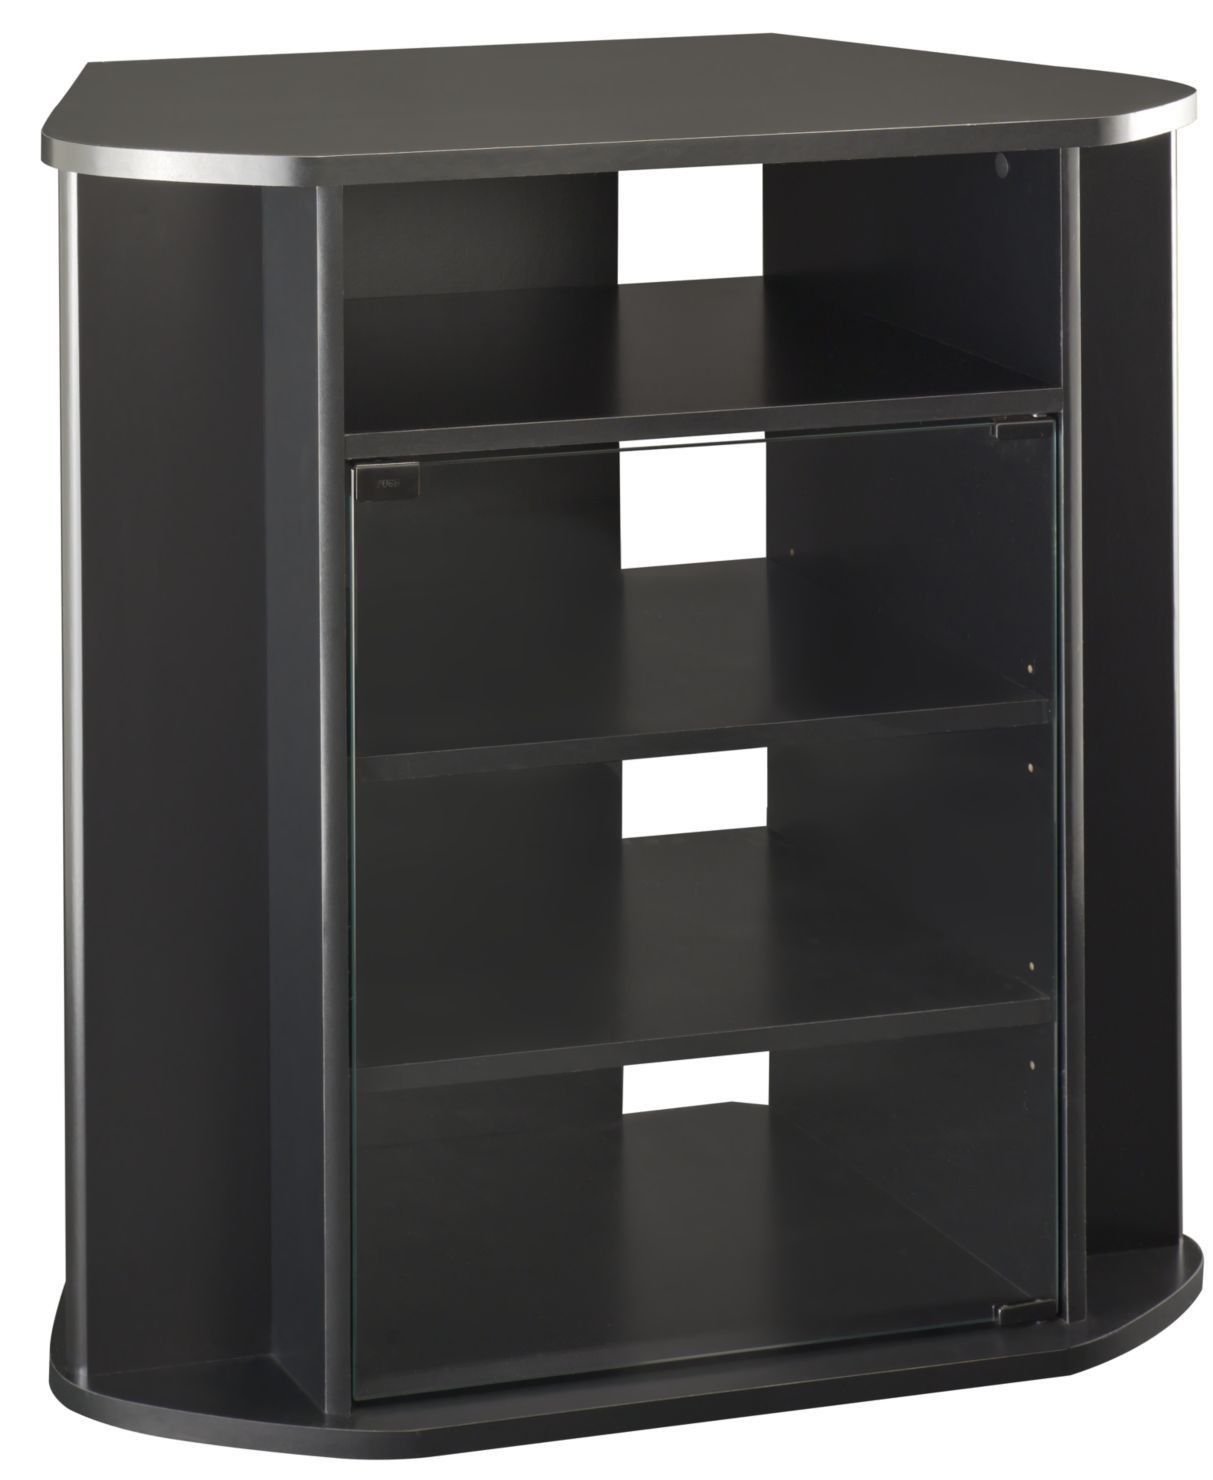 Visions Black Tall Corner Tv Stand From Bush (my37927 03 Pertaining To Tall Skinny Tv Stands (View 6 of 15)